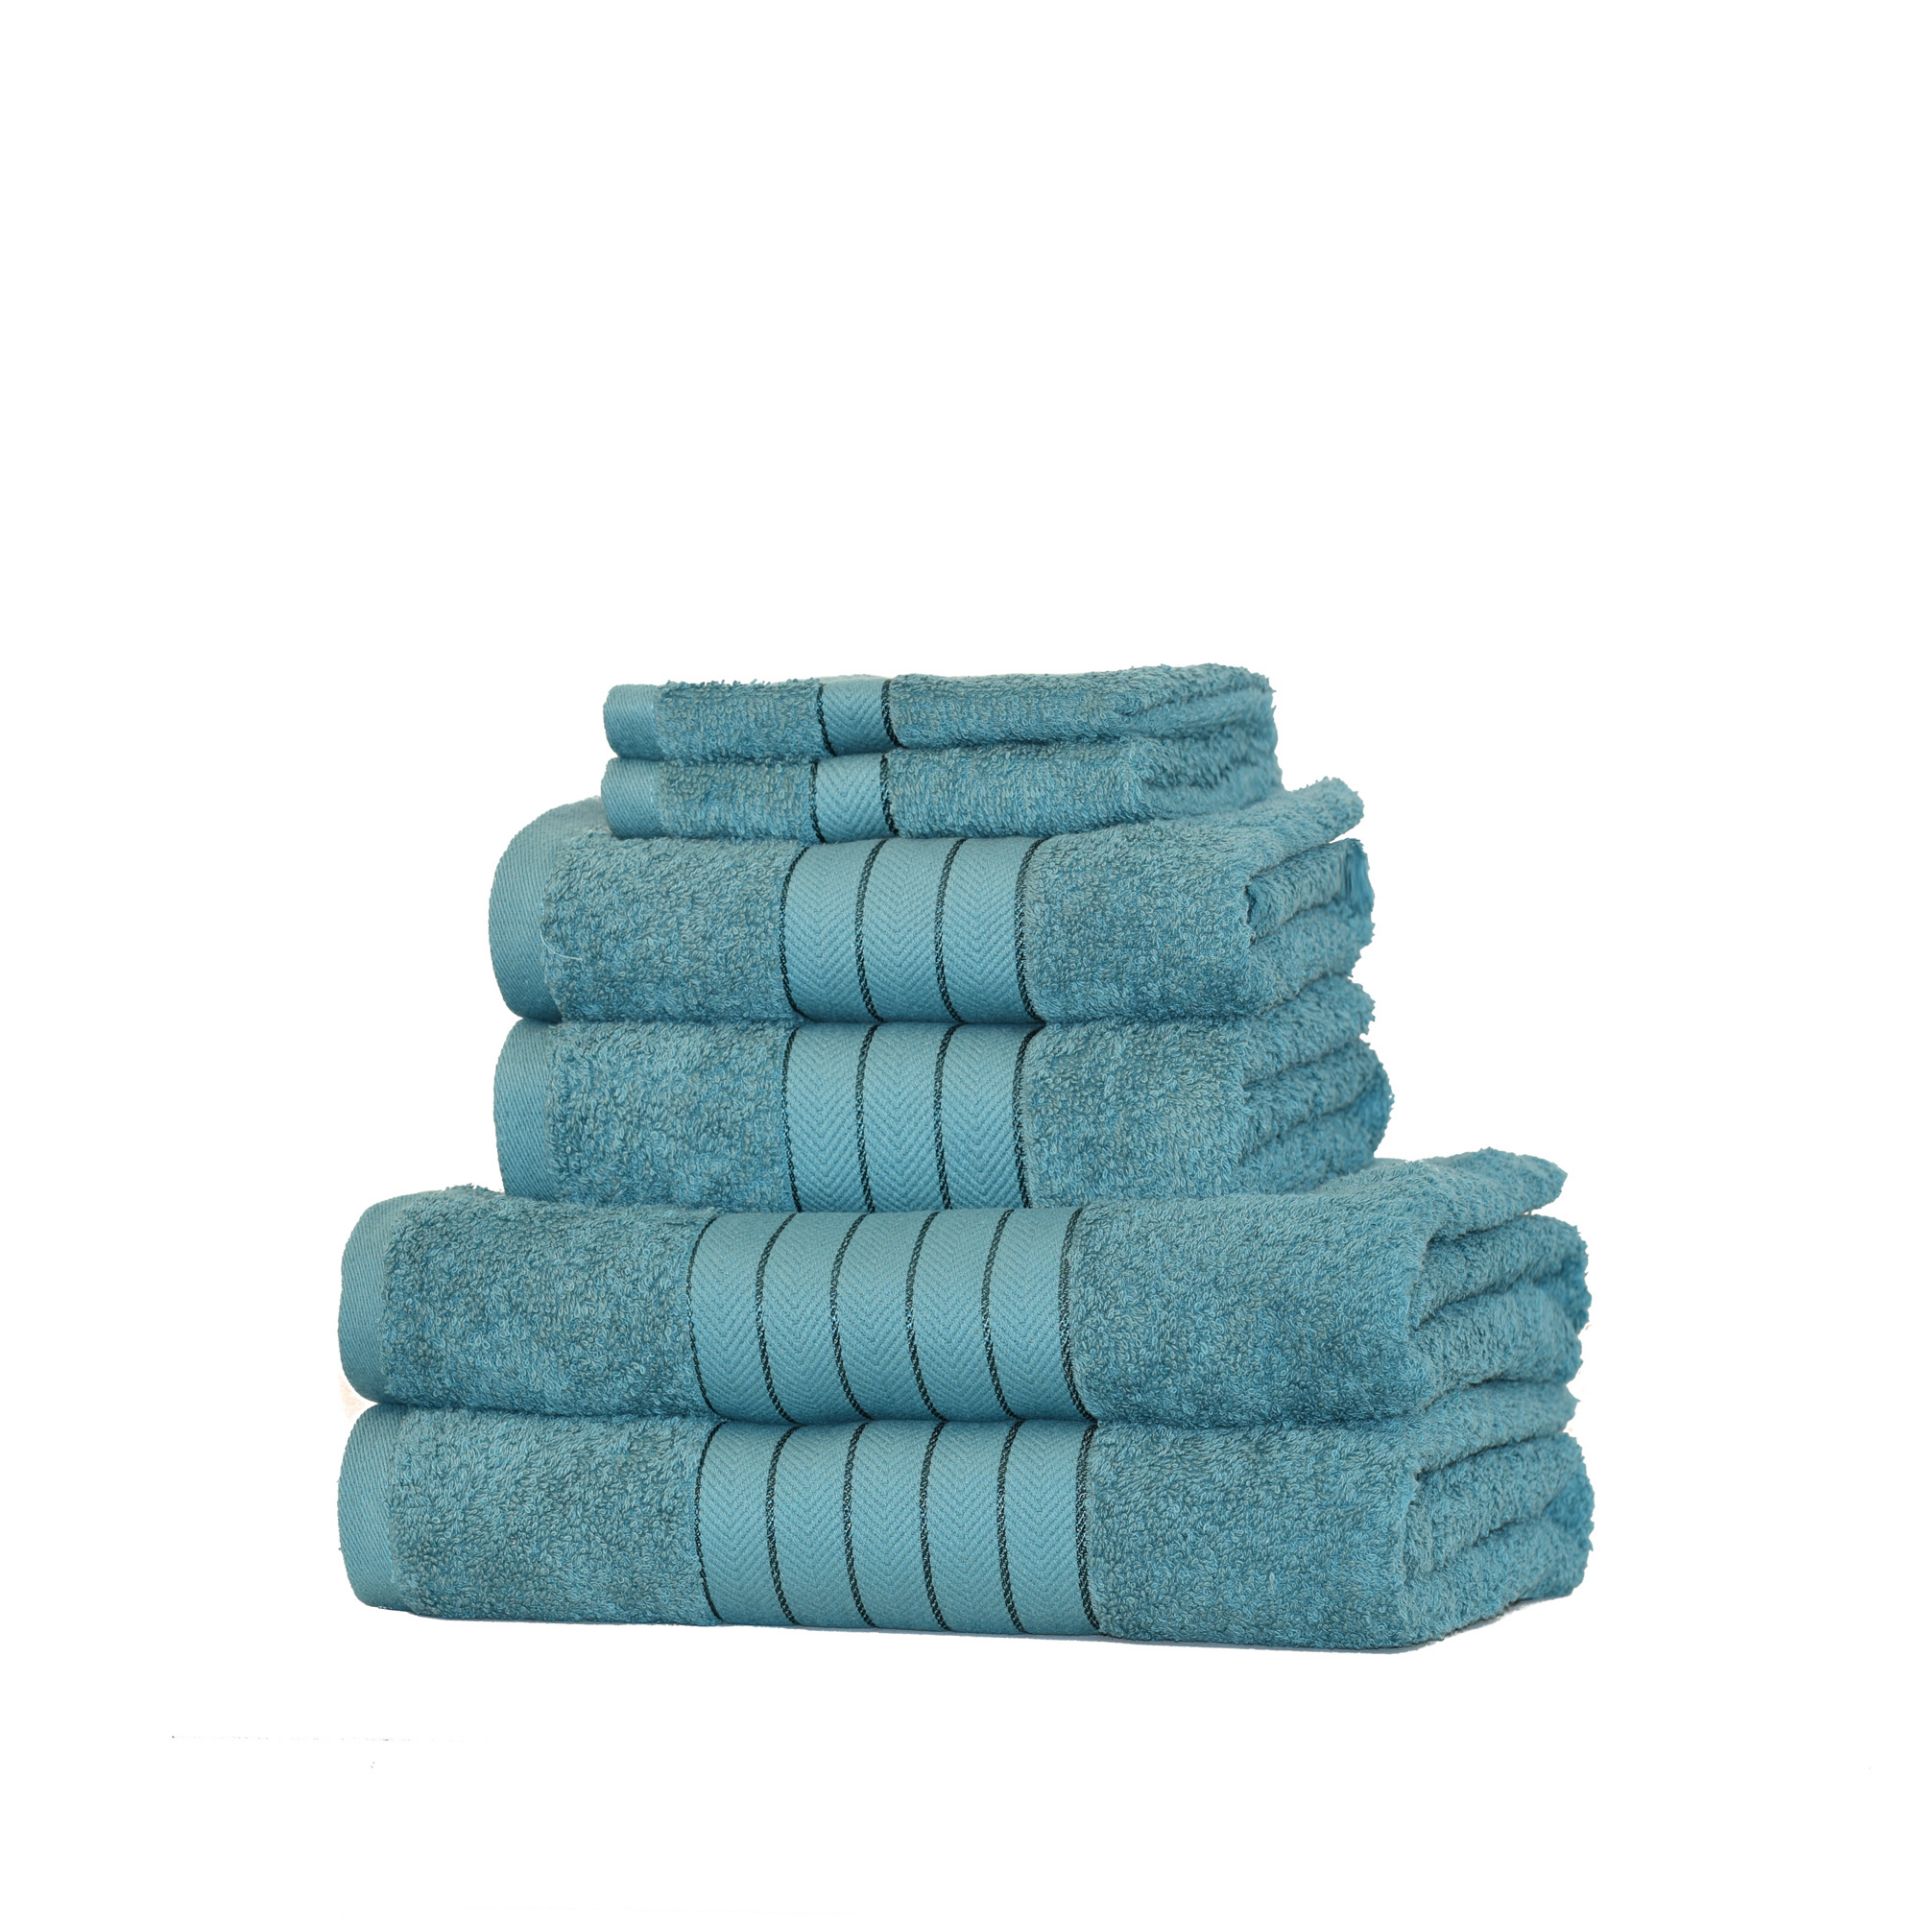 V Brand New Turquoise 6 Piece Towel Bale Set With 2 Face Towels - 2 Hand Towels - 1 Bath Sheet - 1